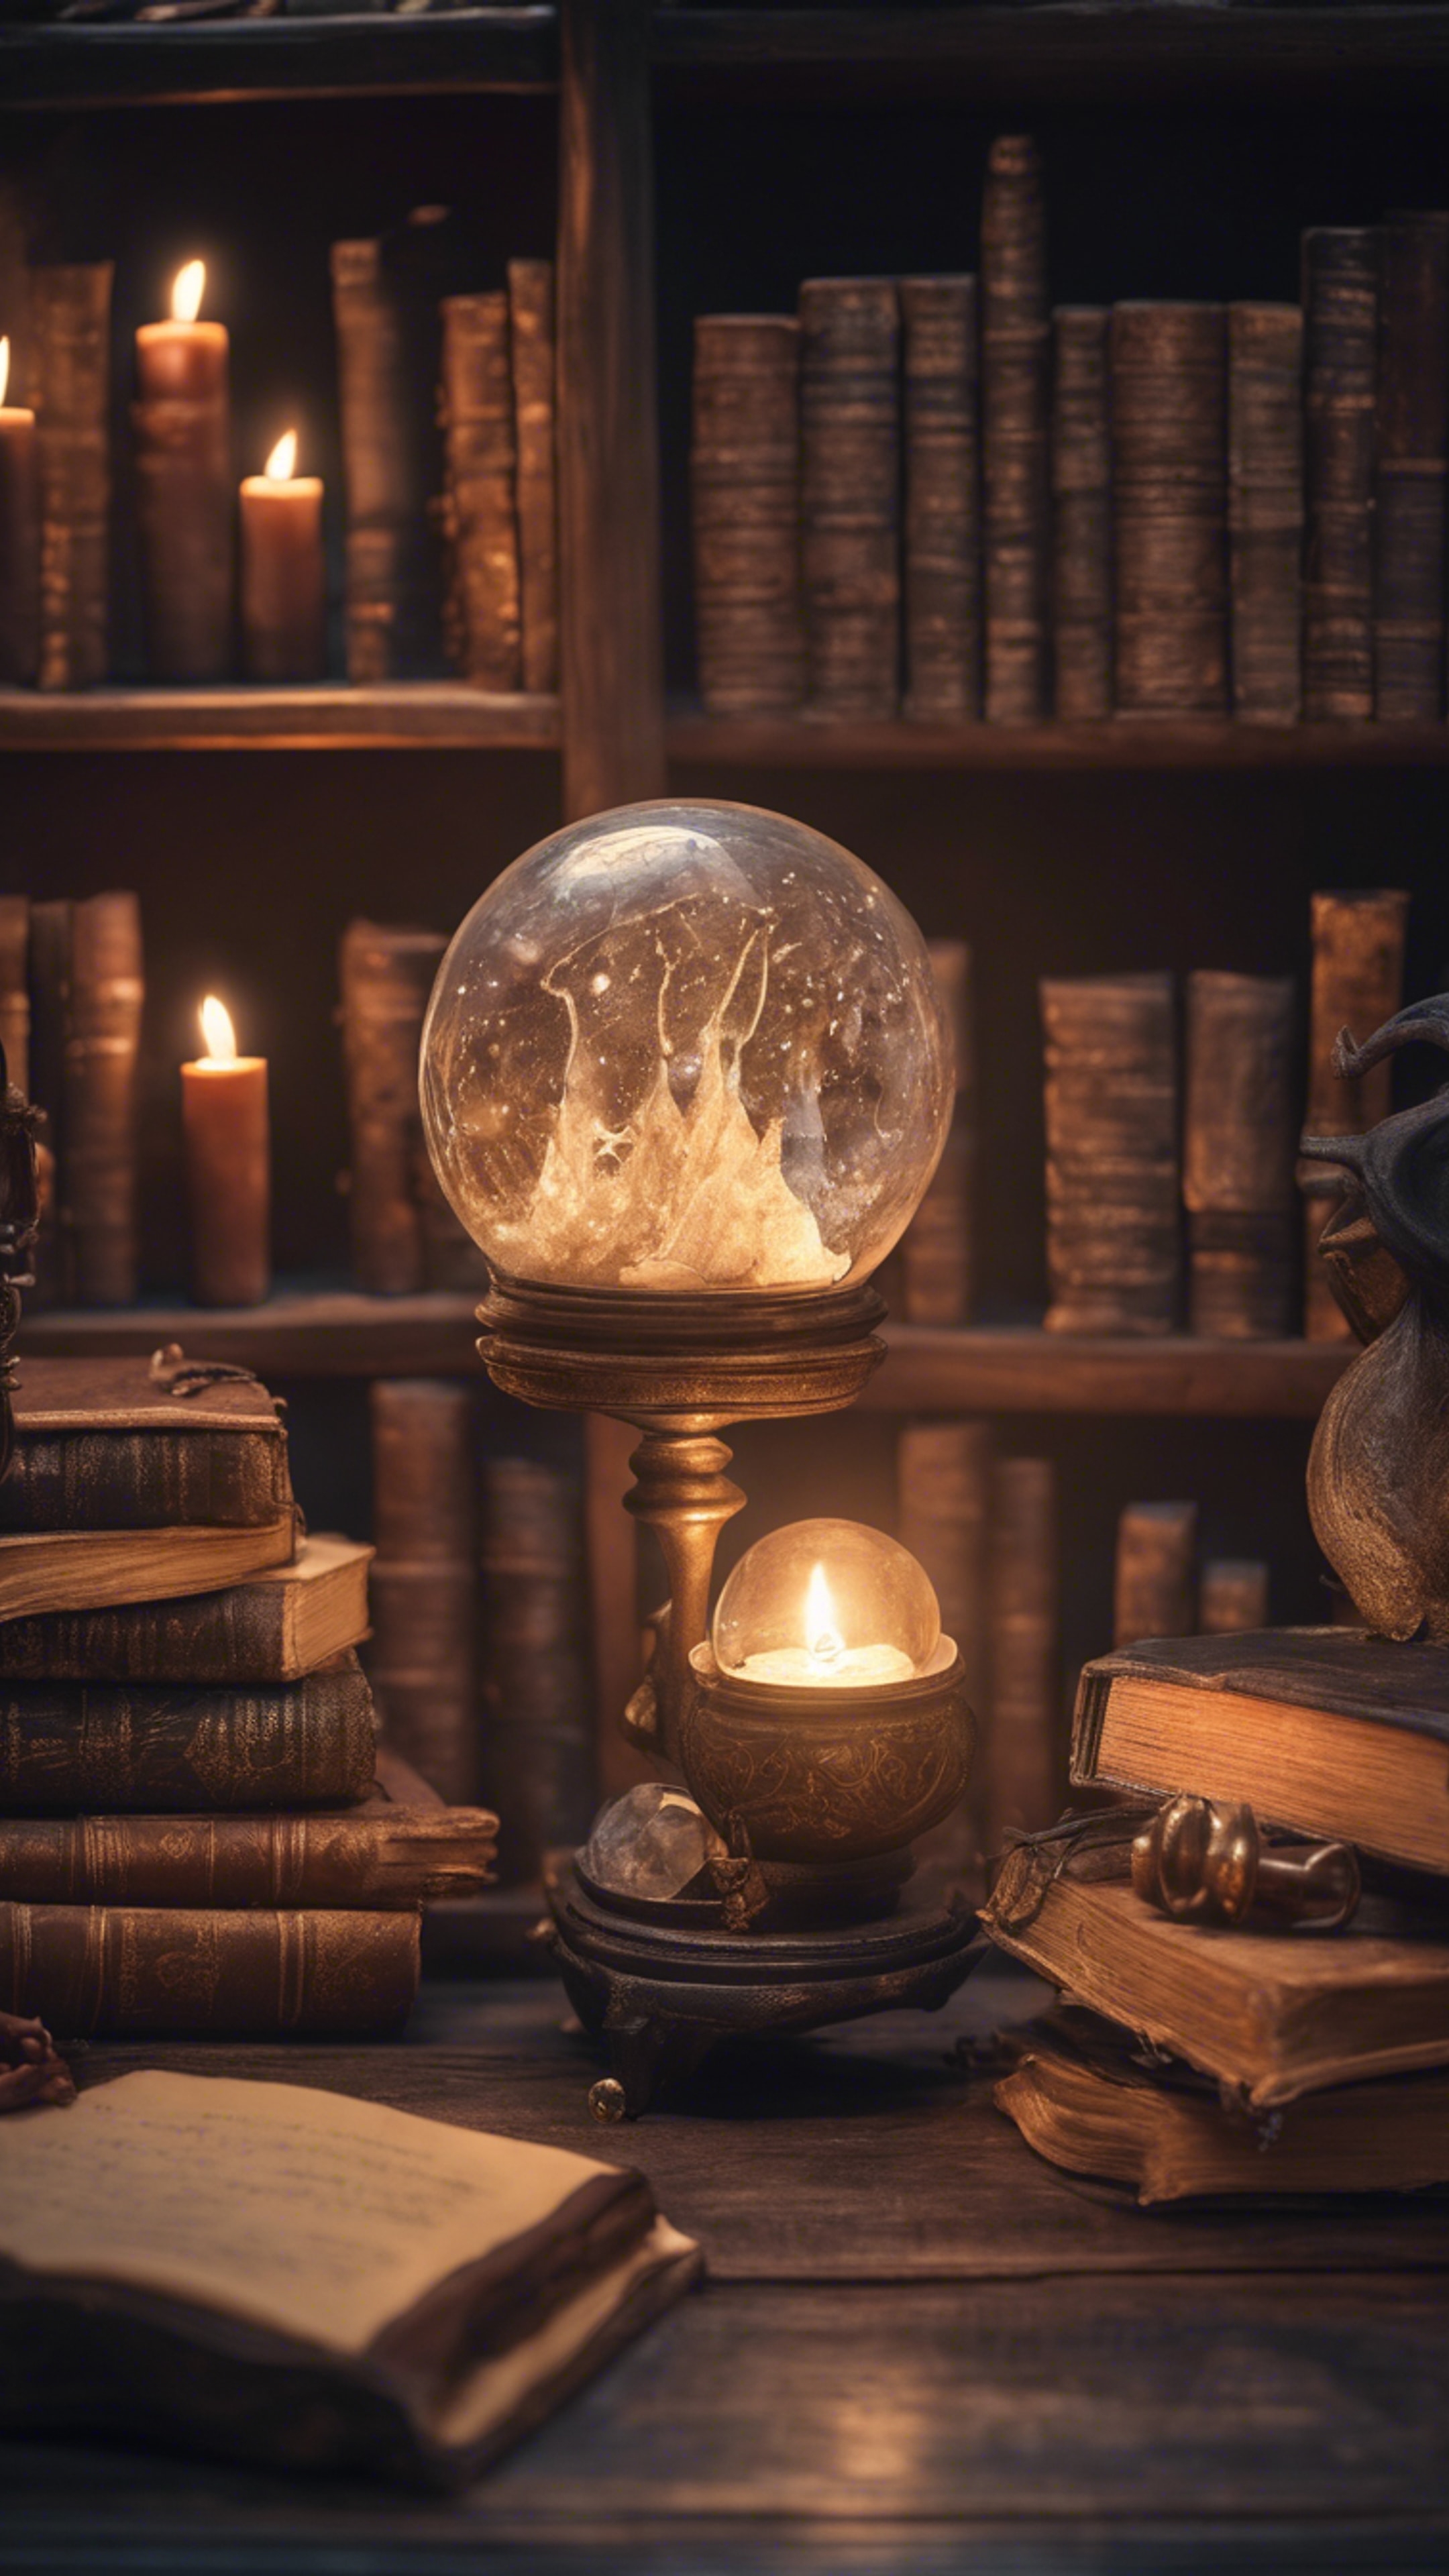 A cozy mystical scene with a wizard’s study room - magical artifacts, rows of spell books, a crystal ball, and a cauldron brewing a potion. 牆紙[df00e949c5584759a81e]